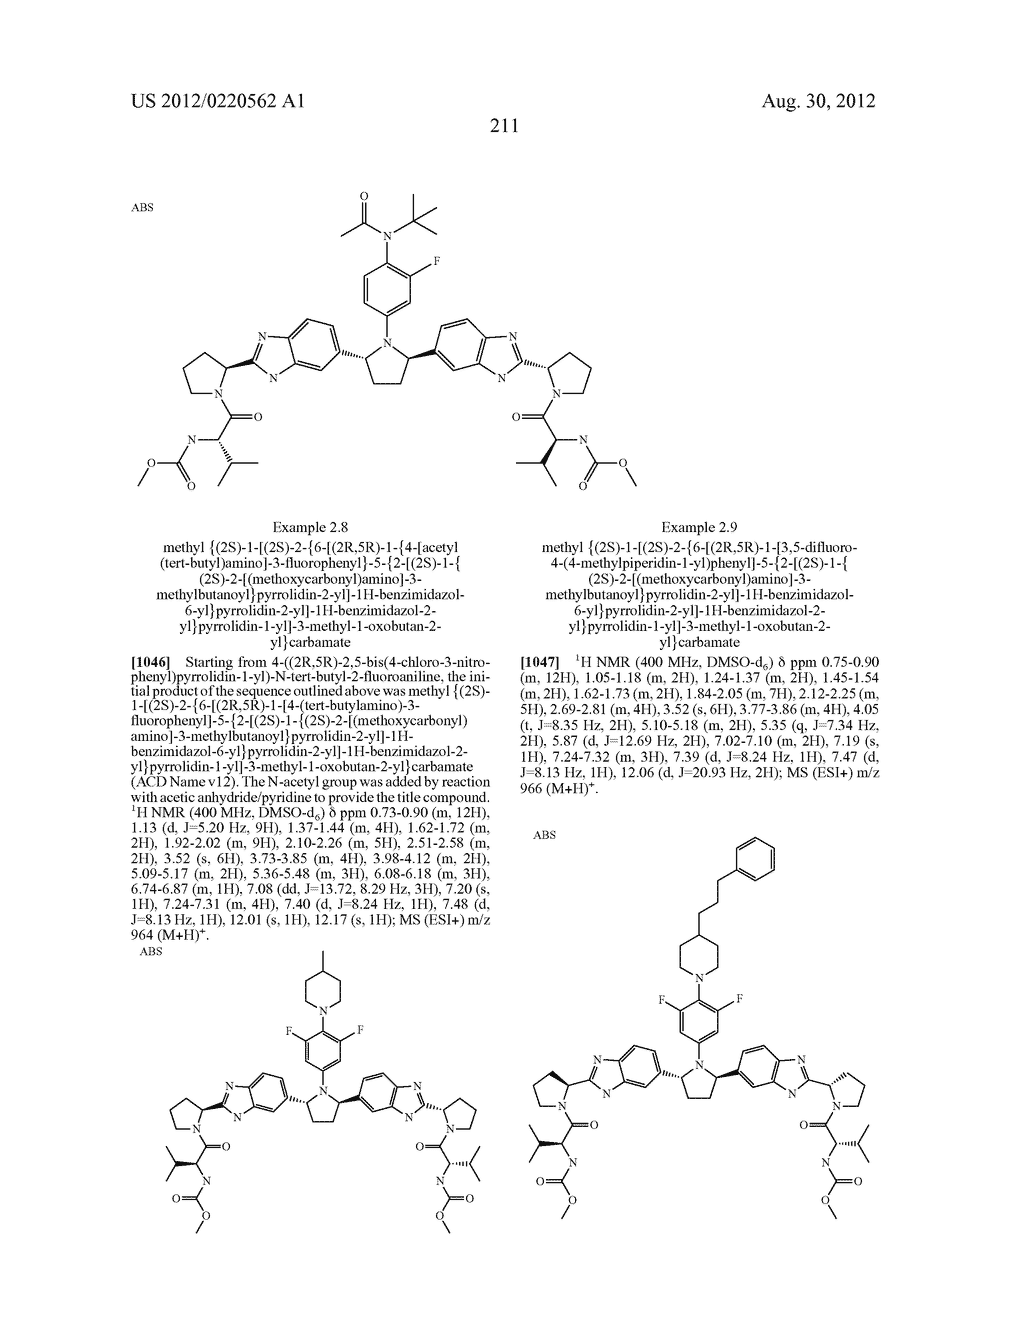 Anti-Viral Compounds - diagram, schematic, and image 212